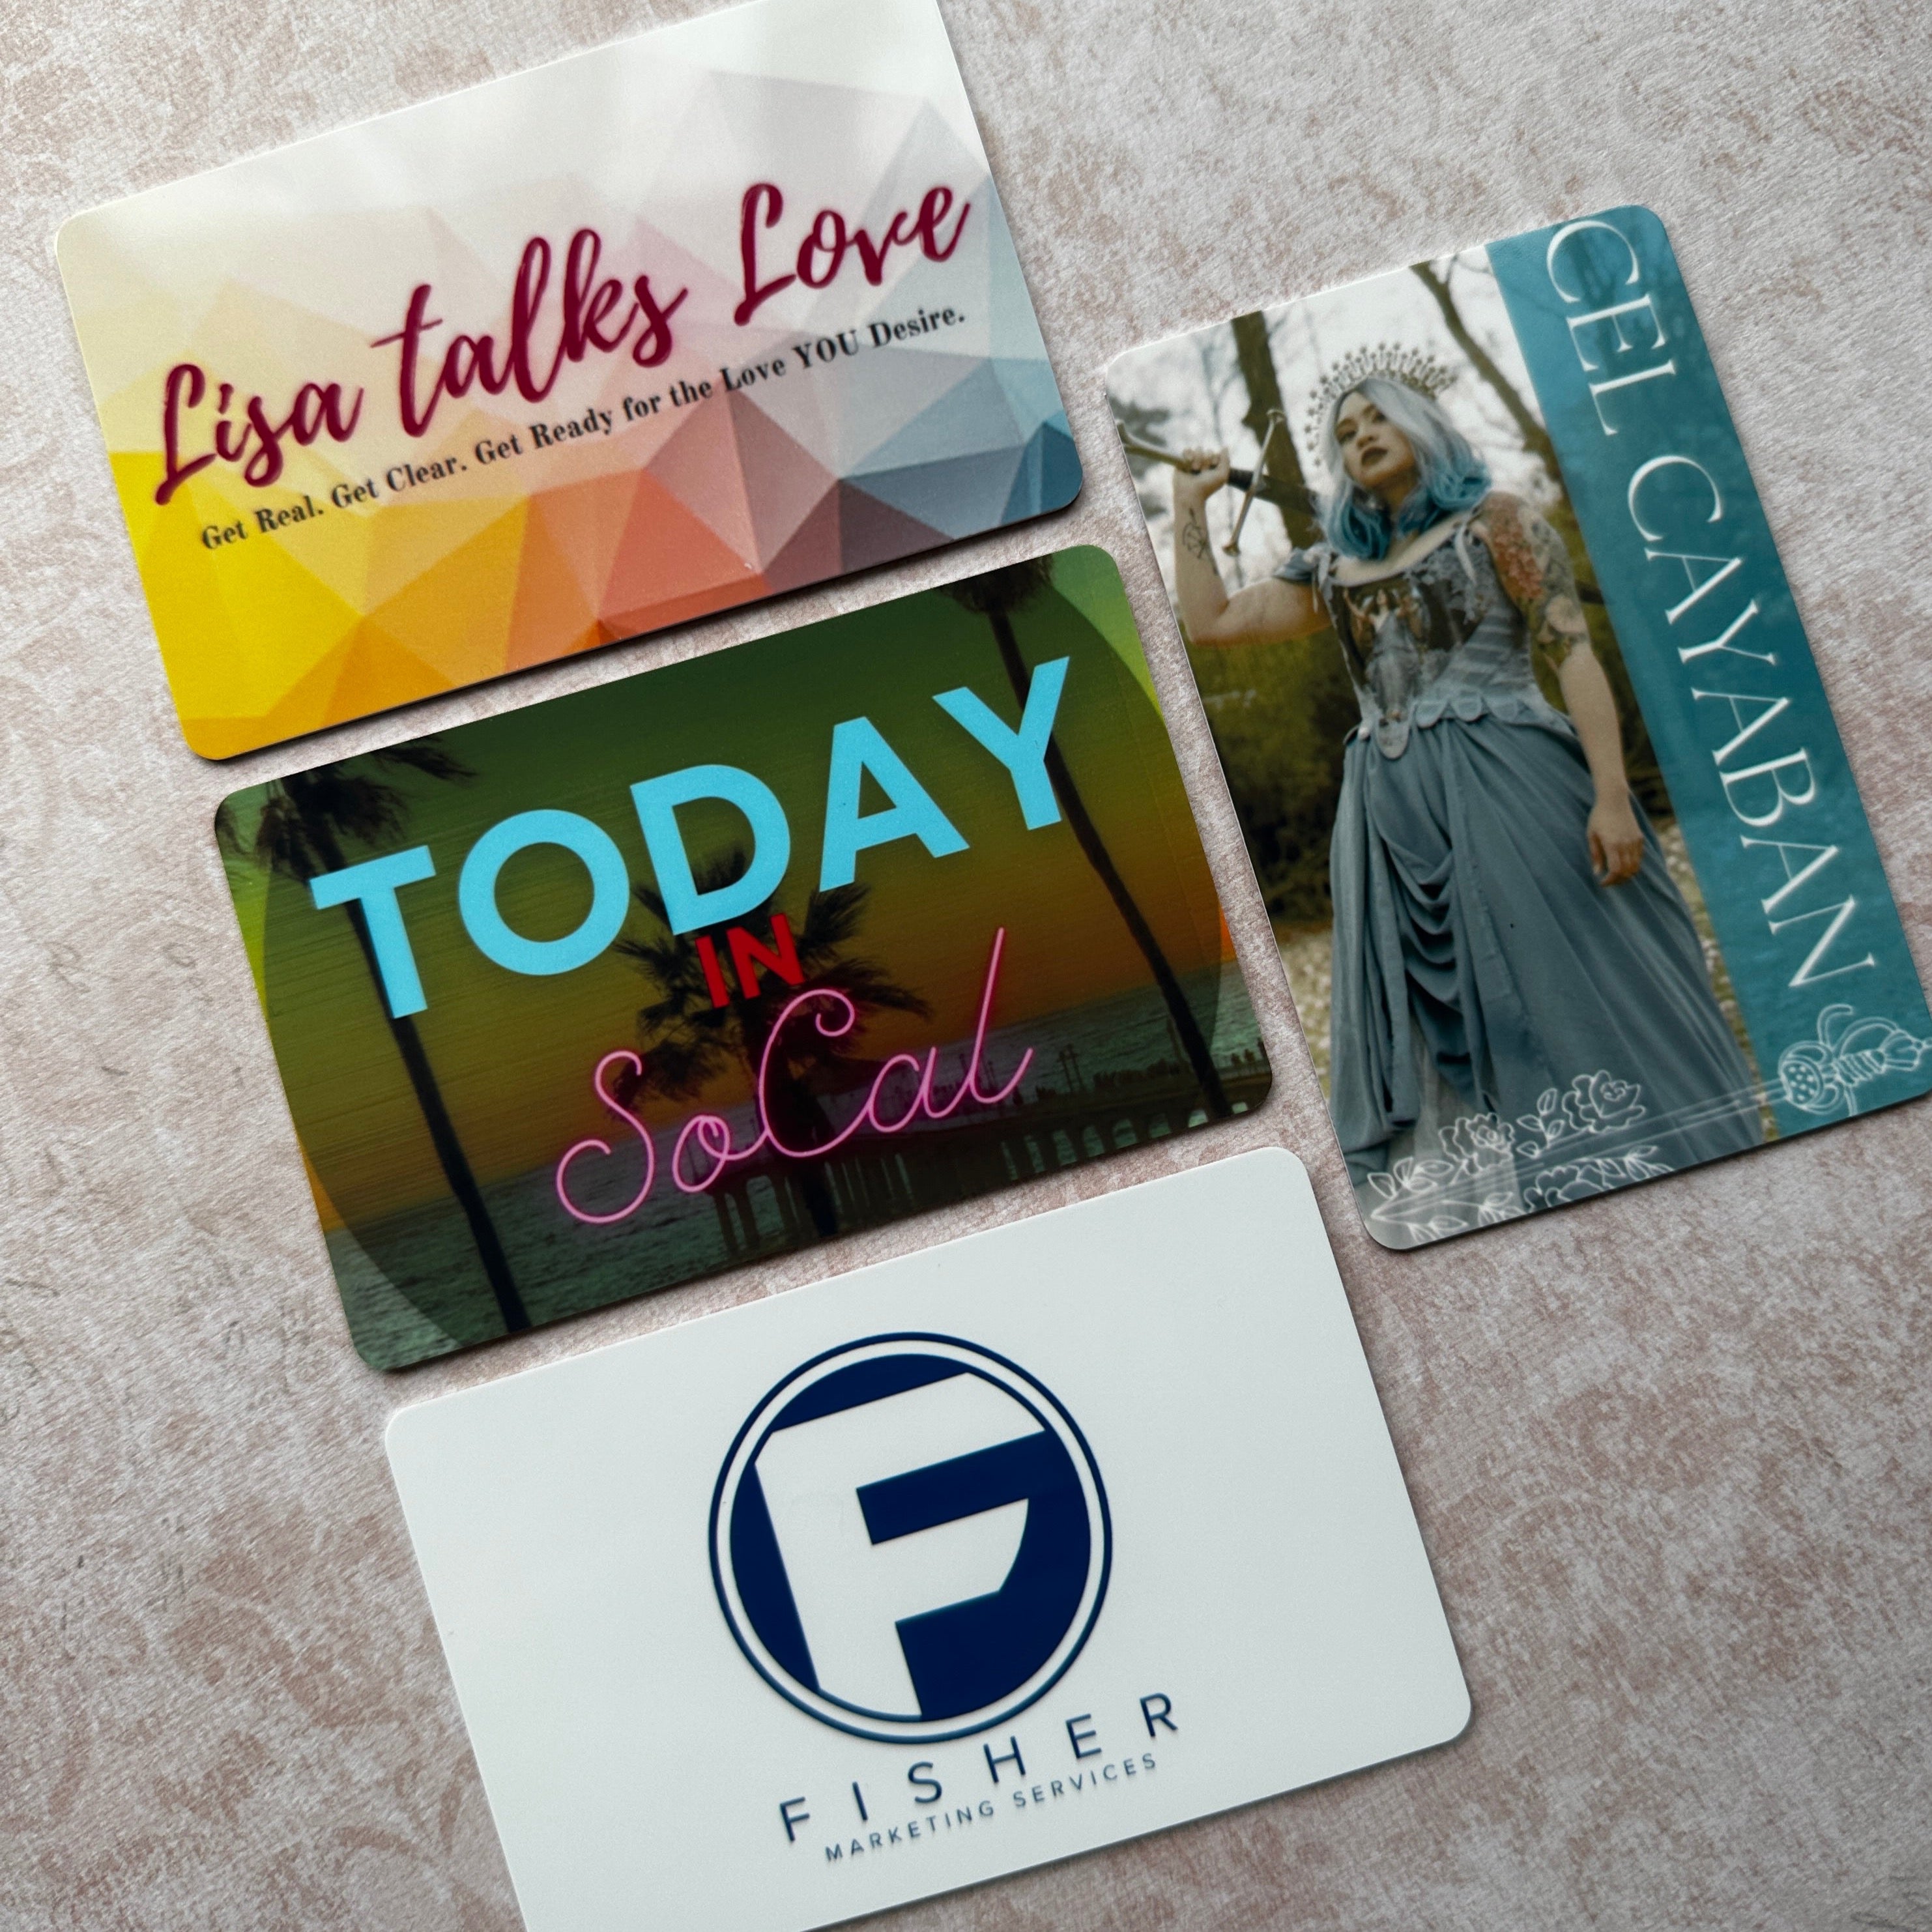 Custom Gift Cards & Loyalty Cards For Your Business